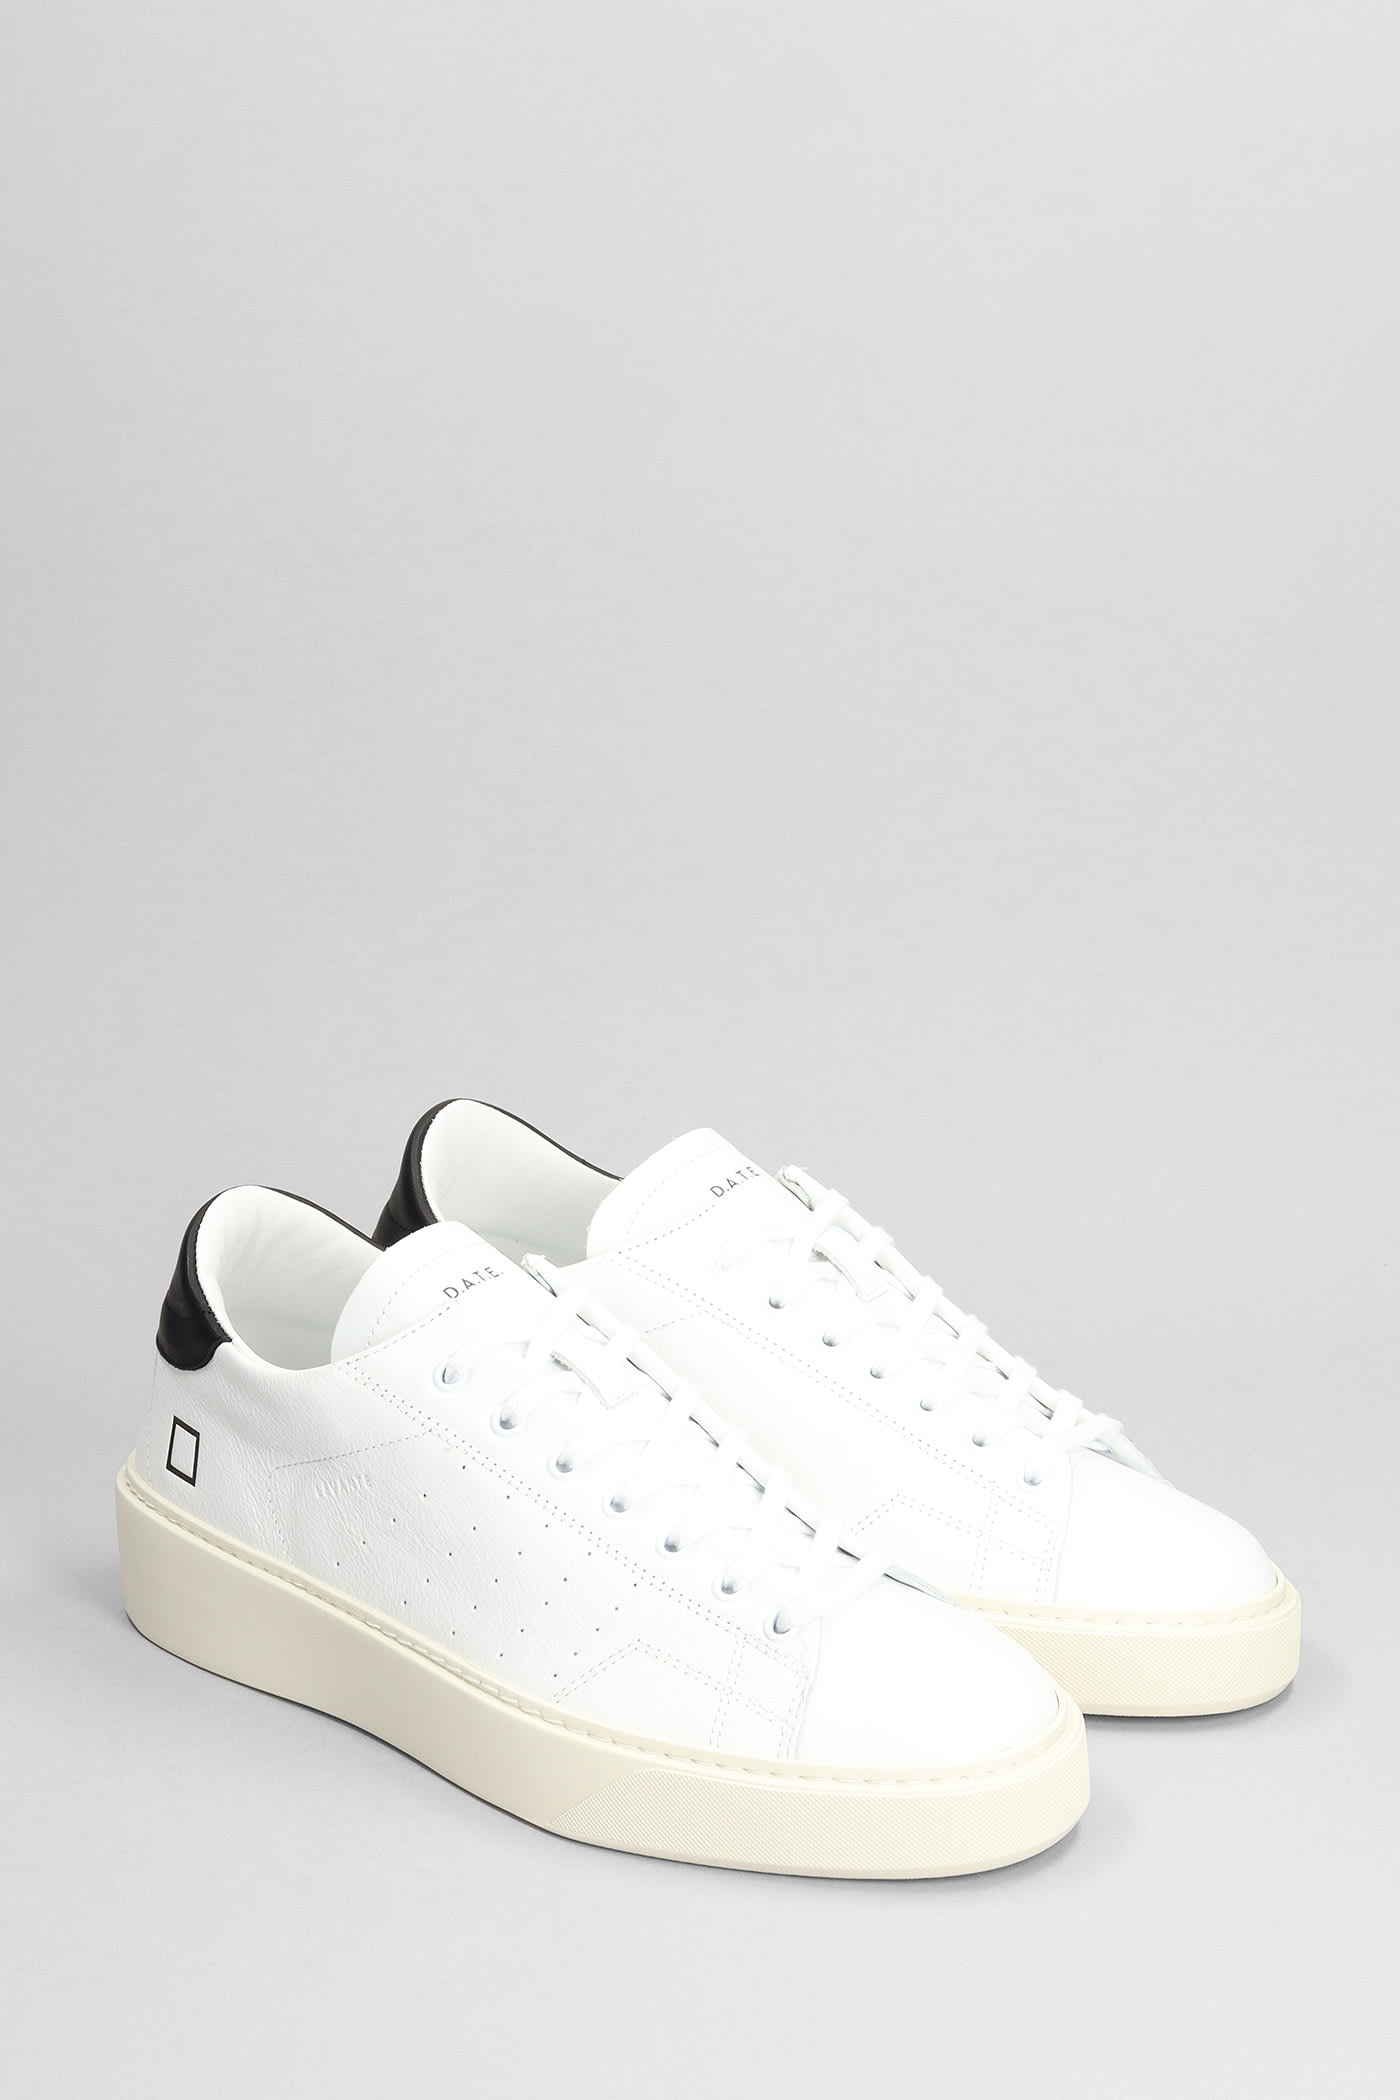 Shop Date Levante Sneakers In White Leather